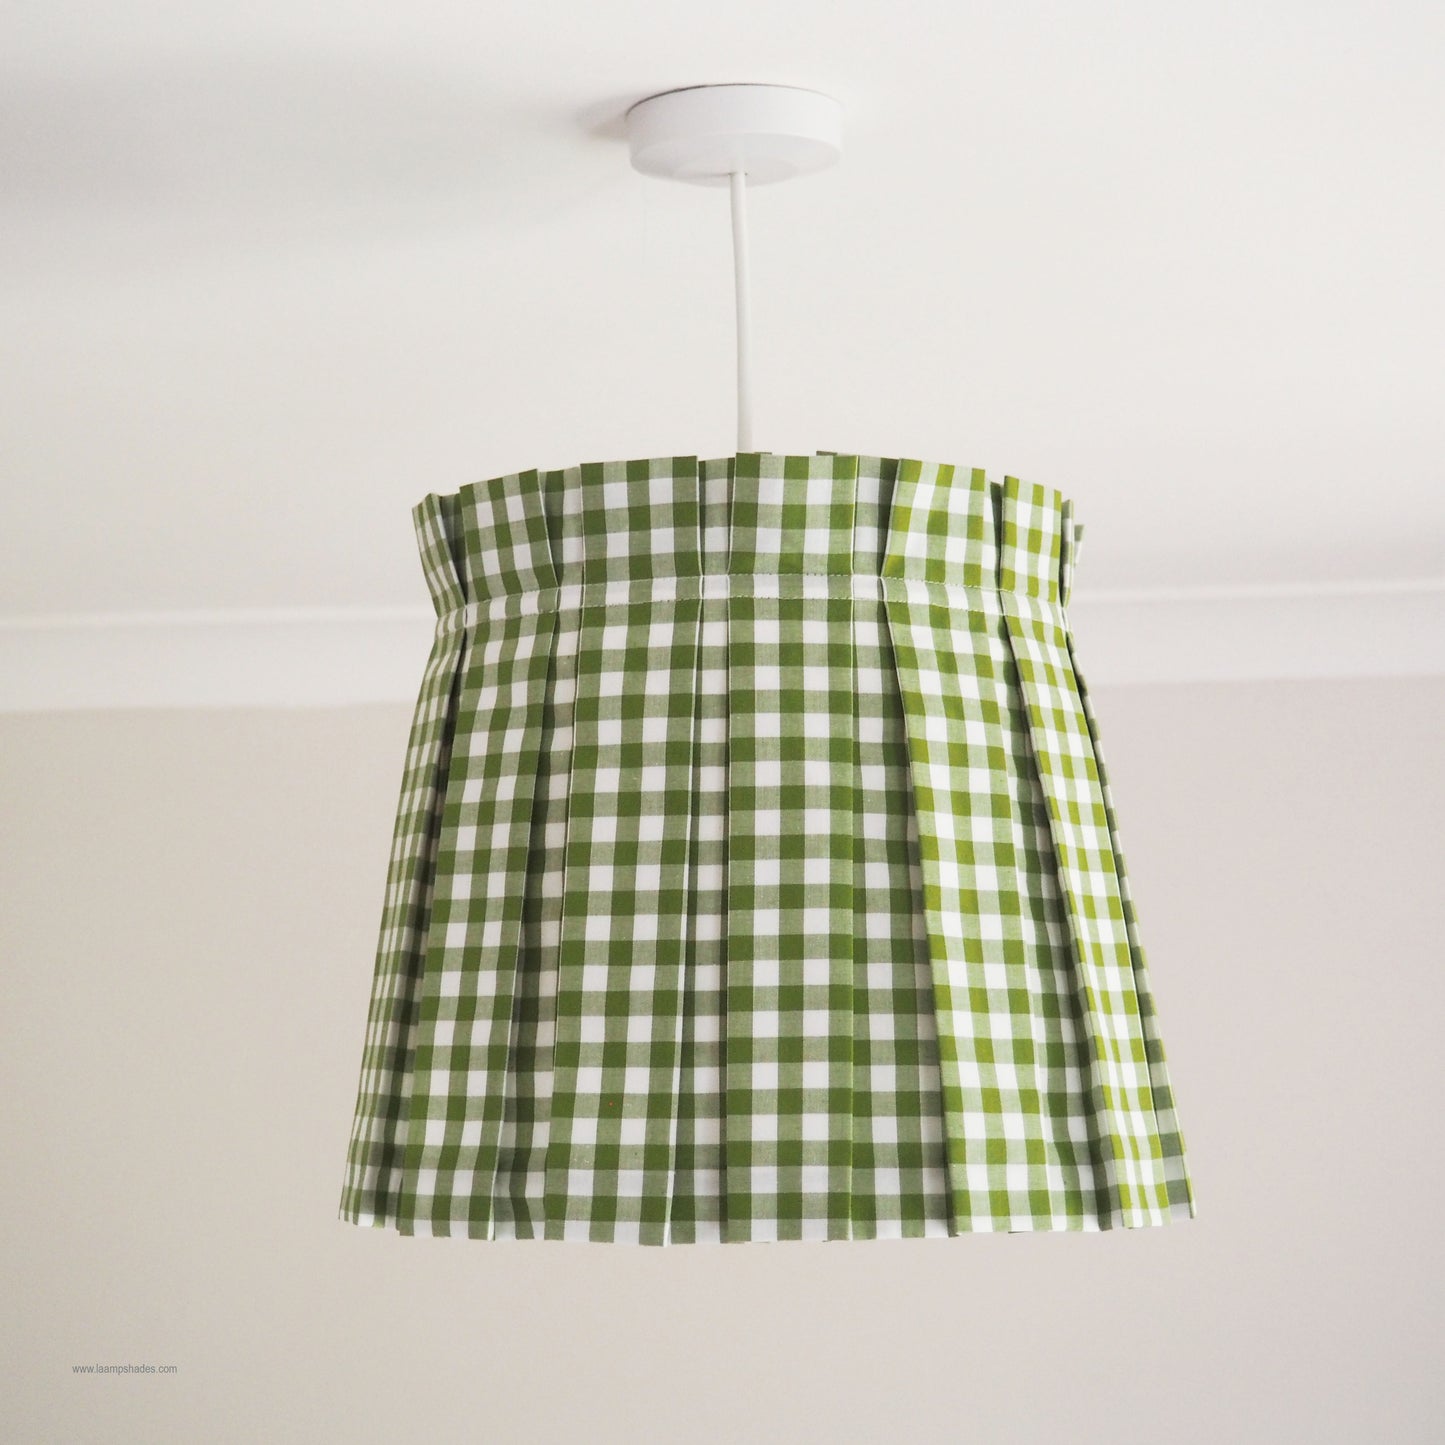 LARGE box pleat green gingham fabric lampshade